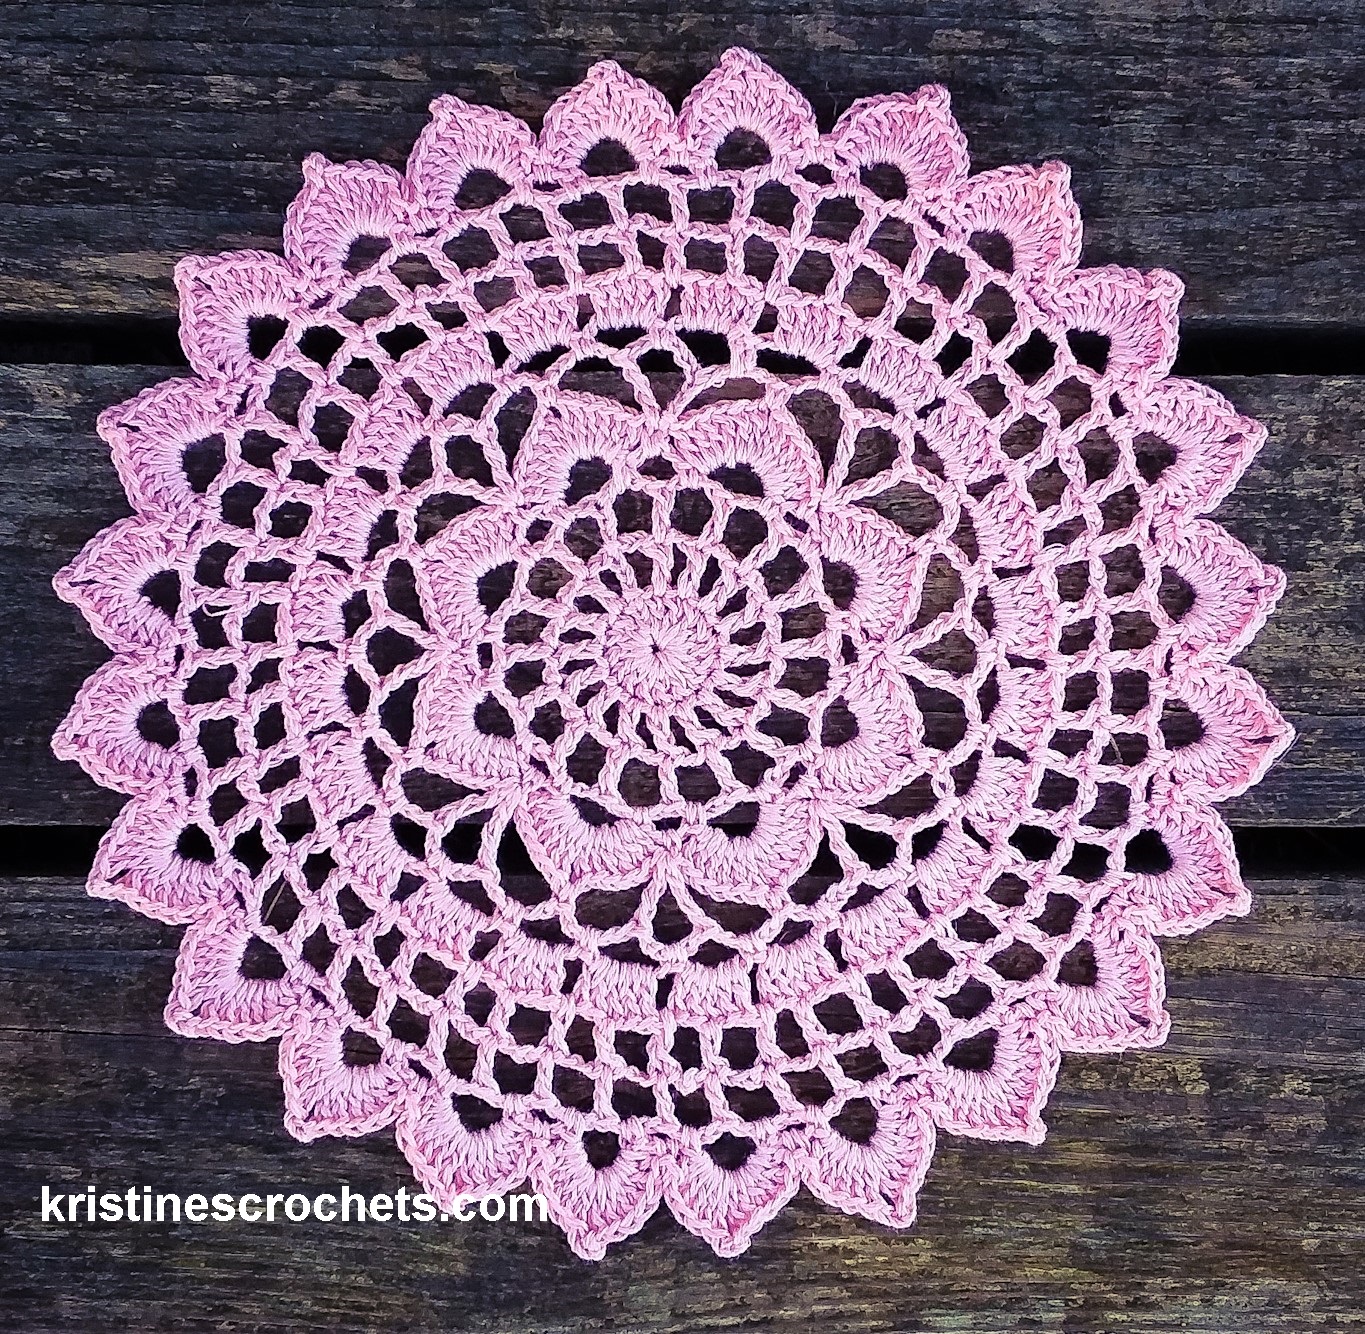 Free Crochet Patterns For Doily